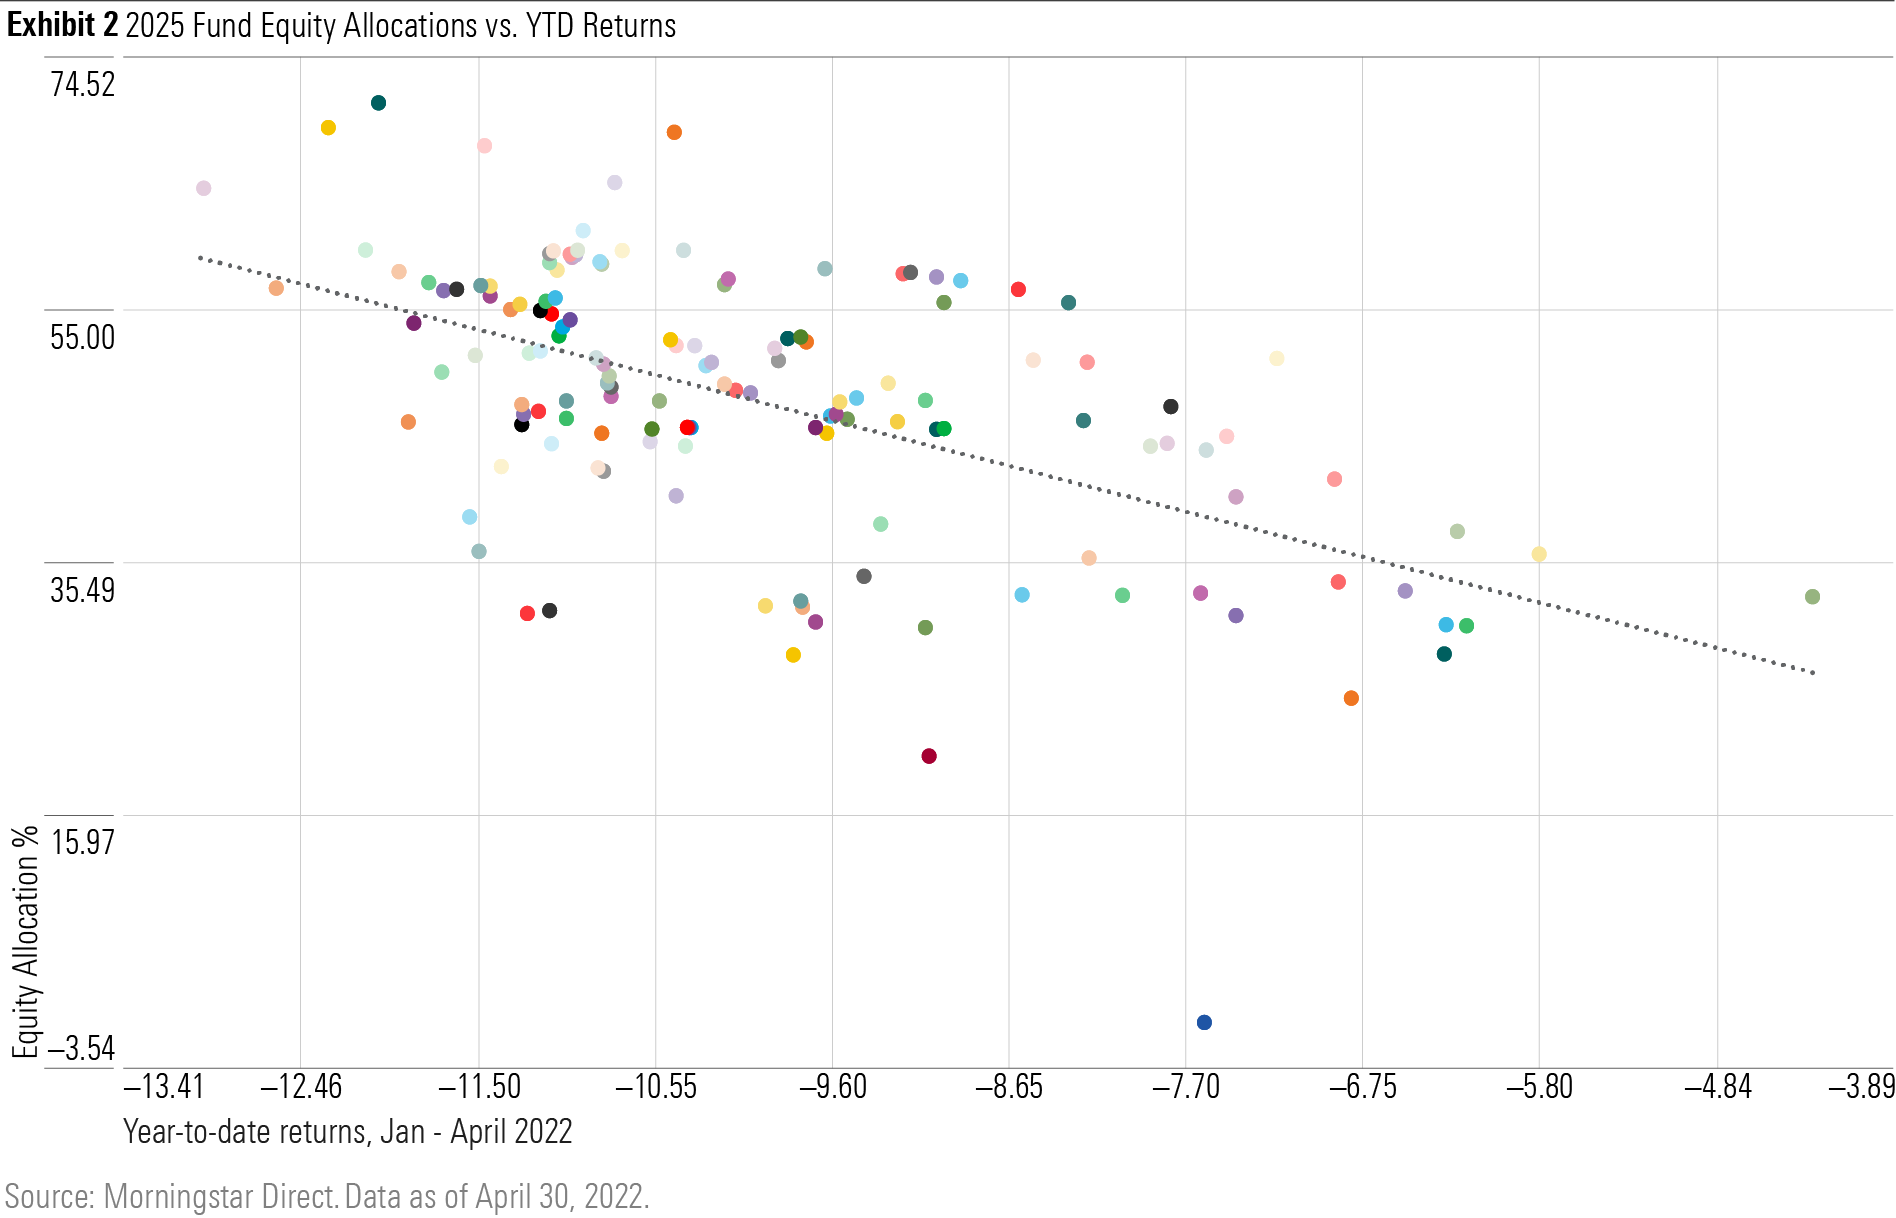 A scatterplot graph showing a strong correlation between equity allocations and year-to-date losses for target-date 2025 funds.